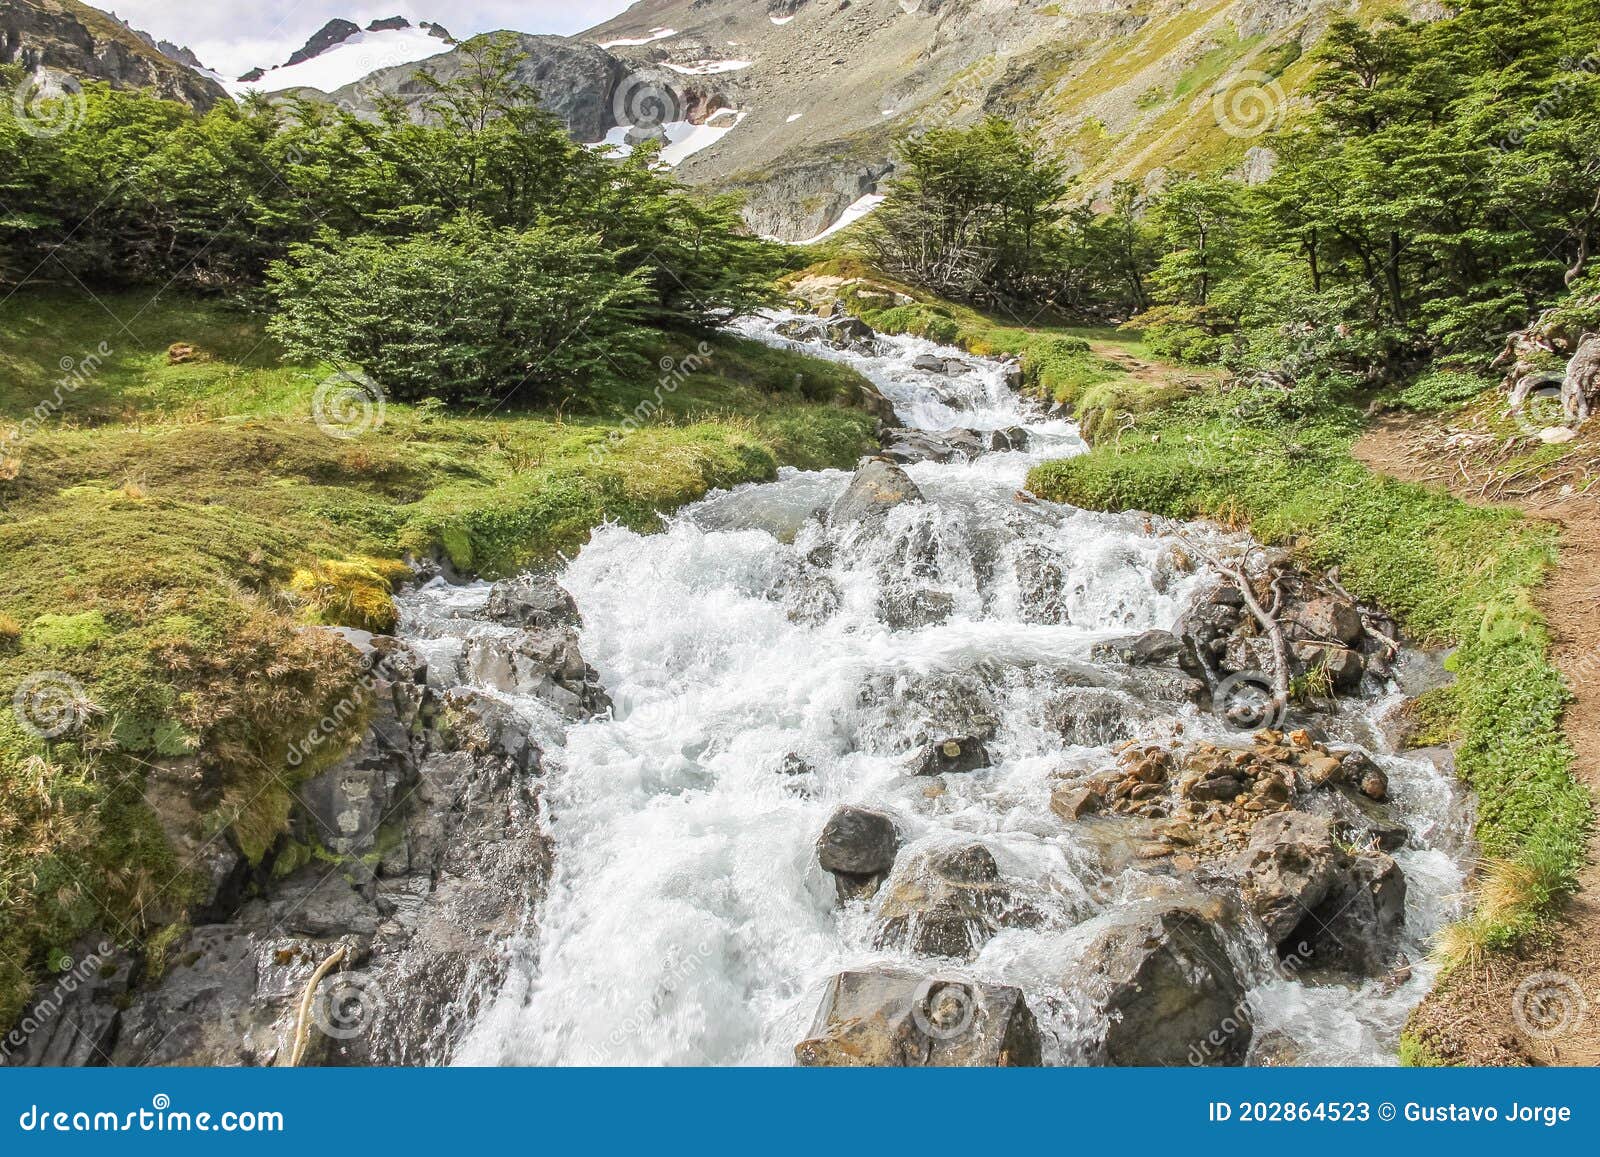 hike to viciguerra and view of the waterfall in summer the ushuaia